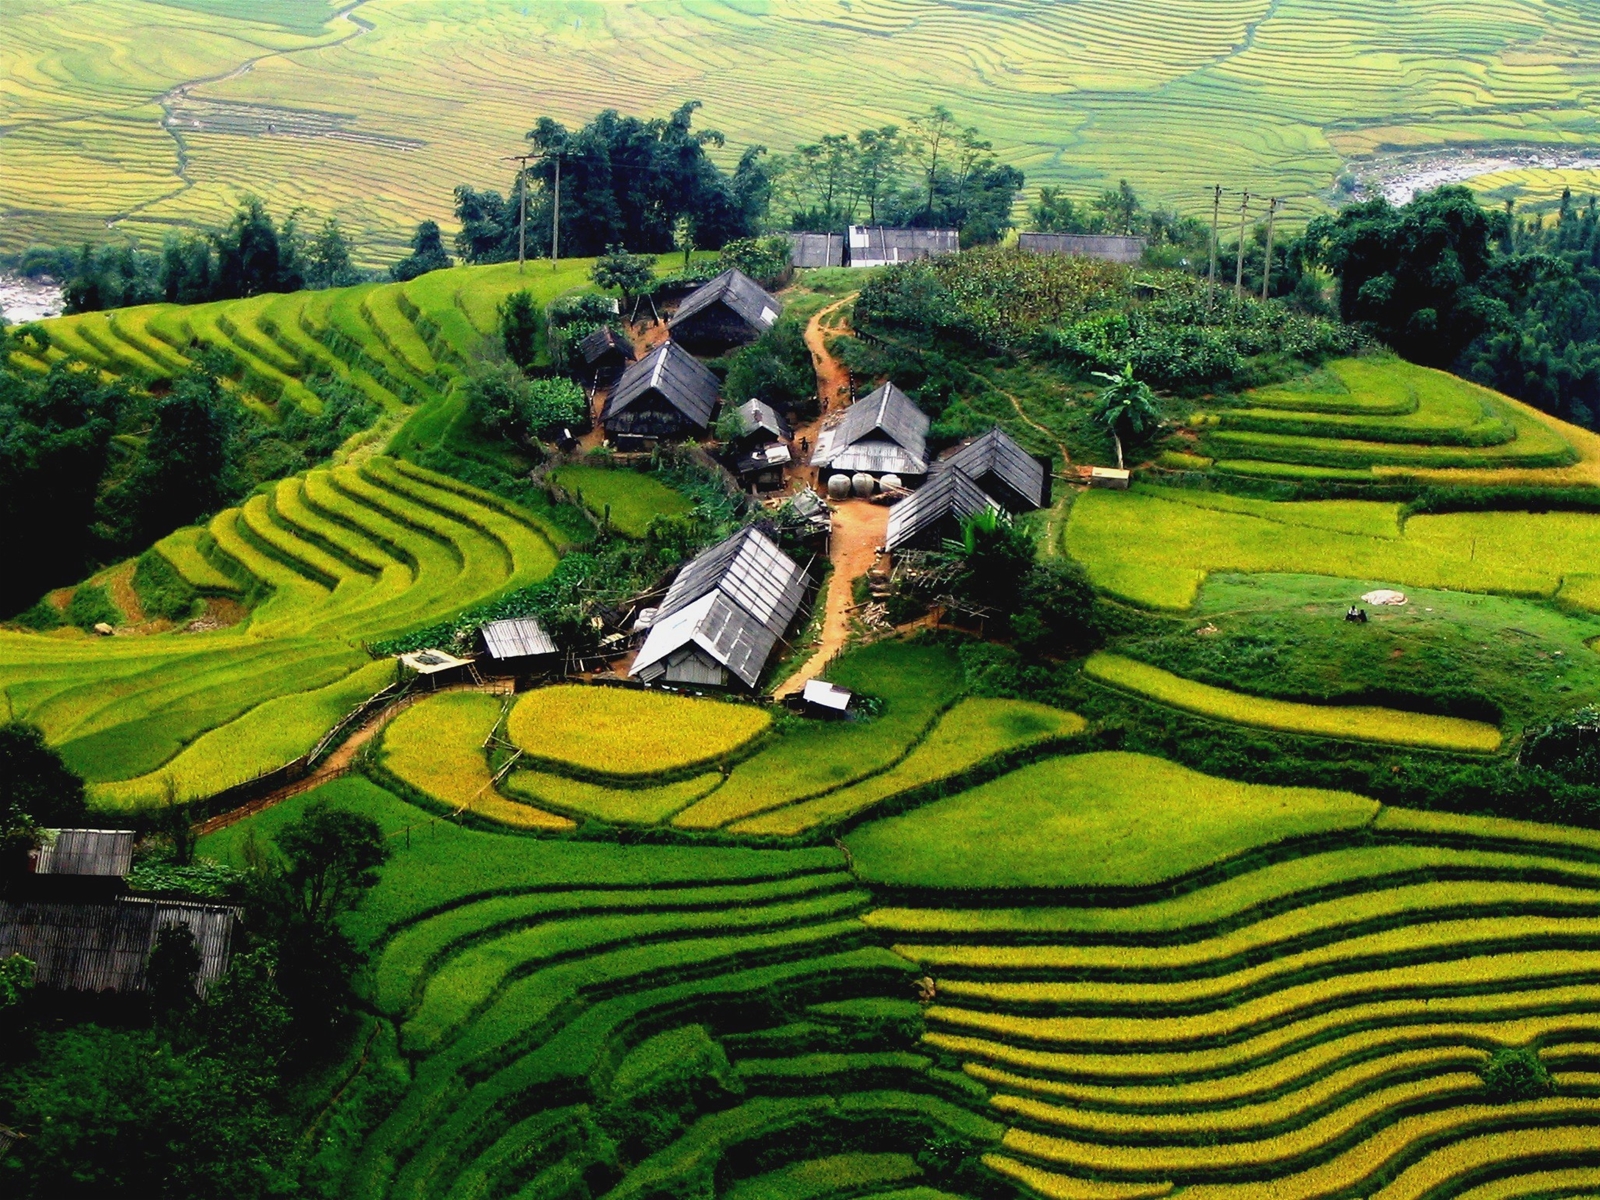 northern vietnam places to visit